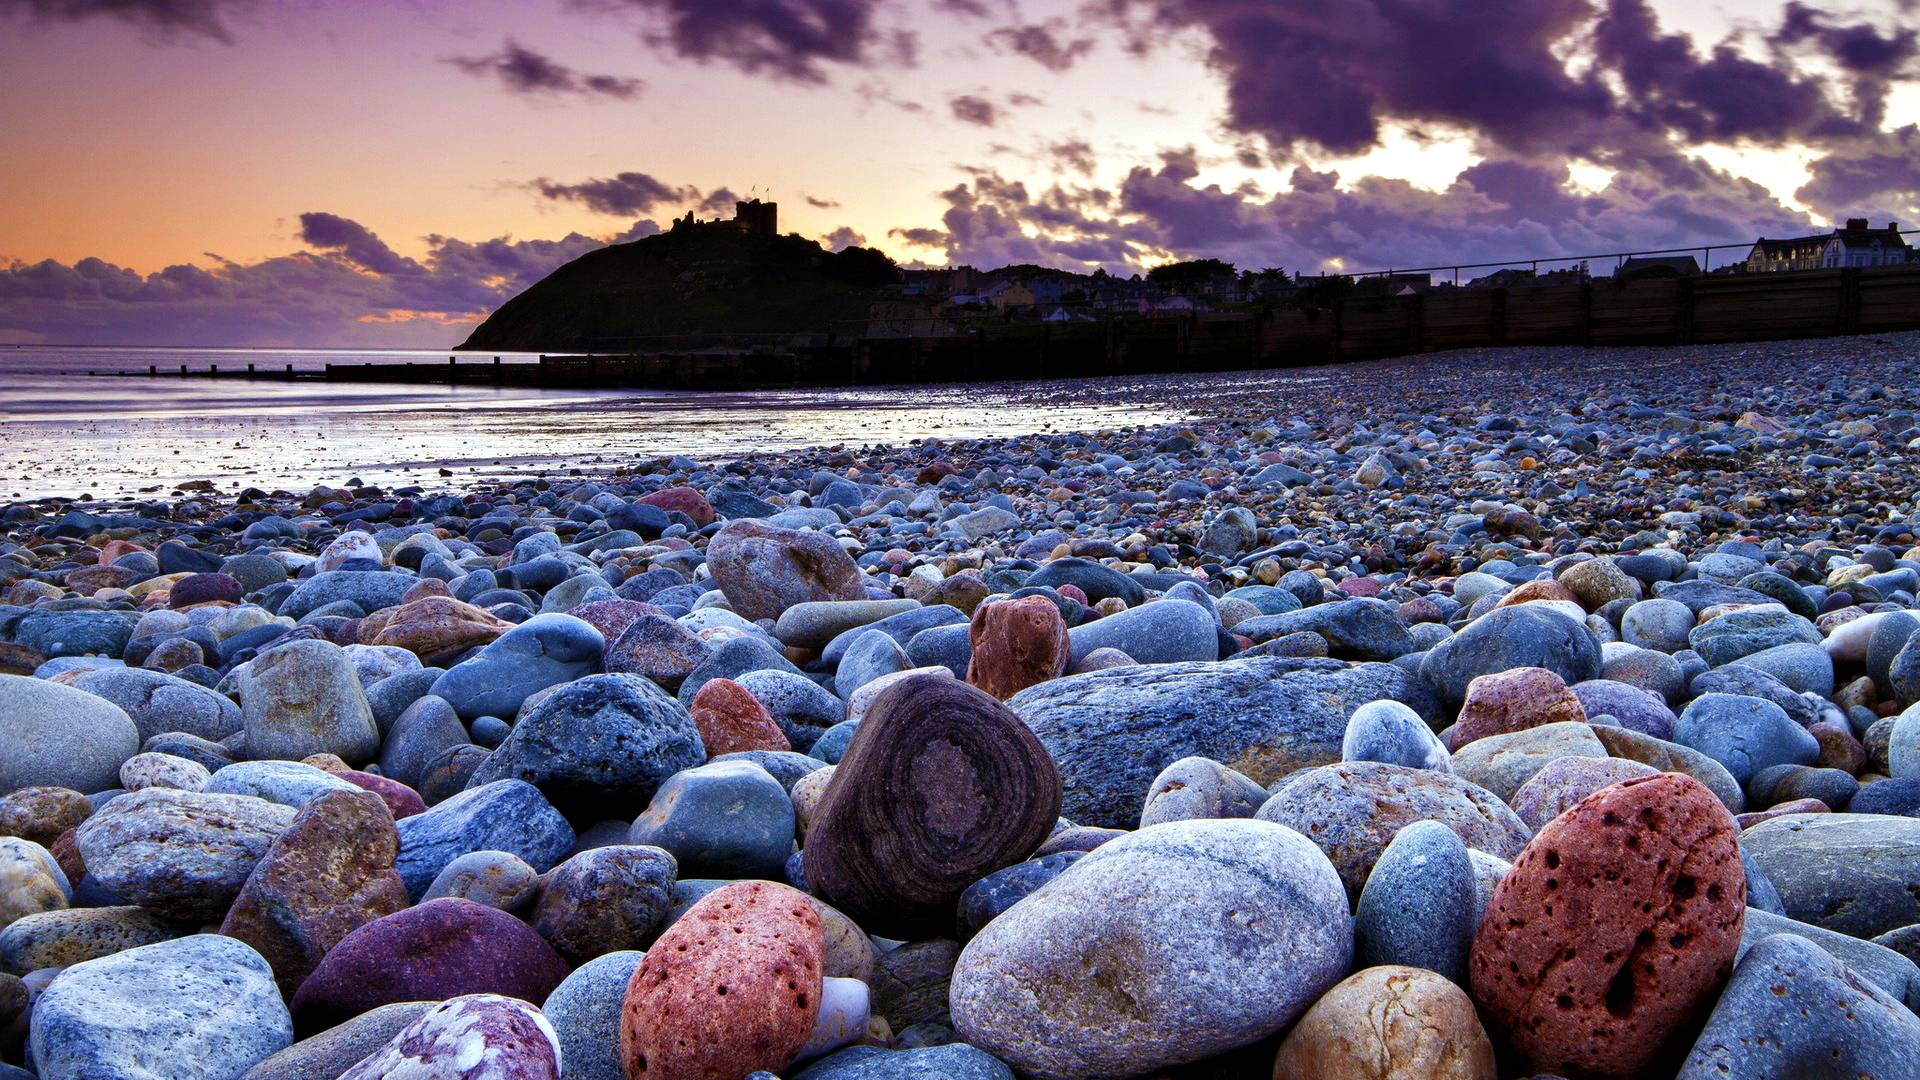 Colorful Stone On Beach Wallpaper Wide Wallpaper High resolution